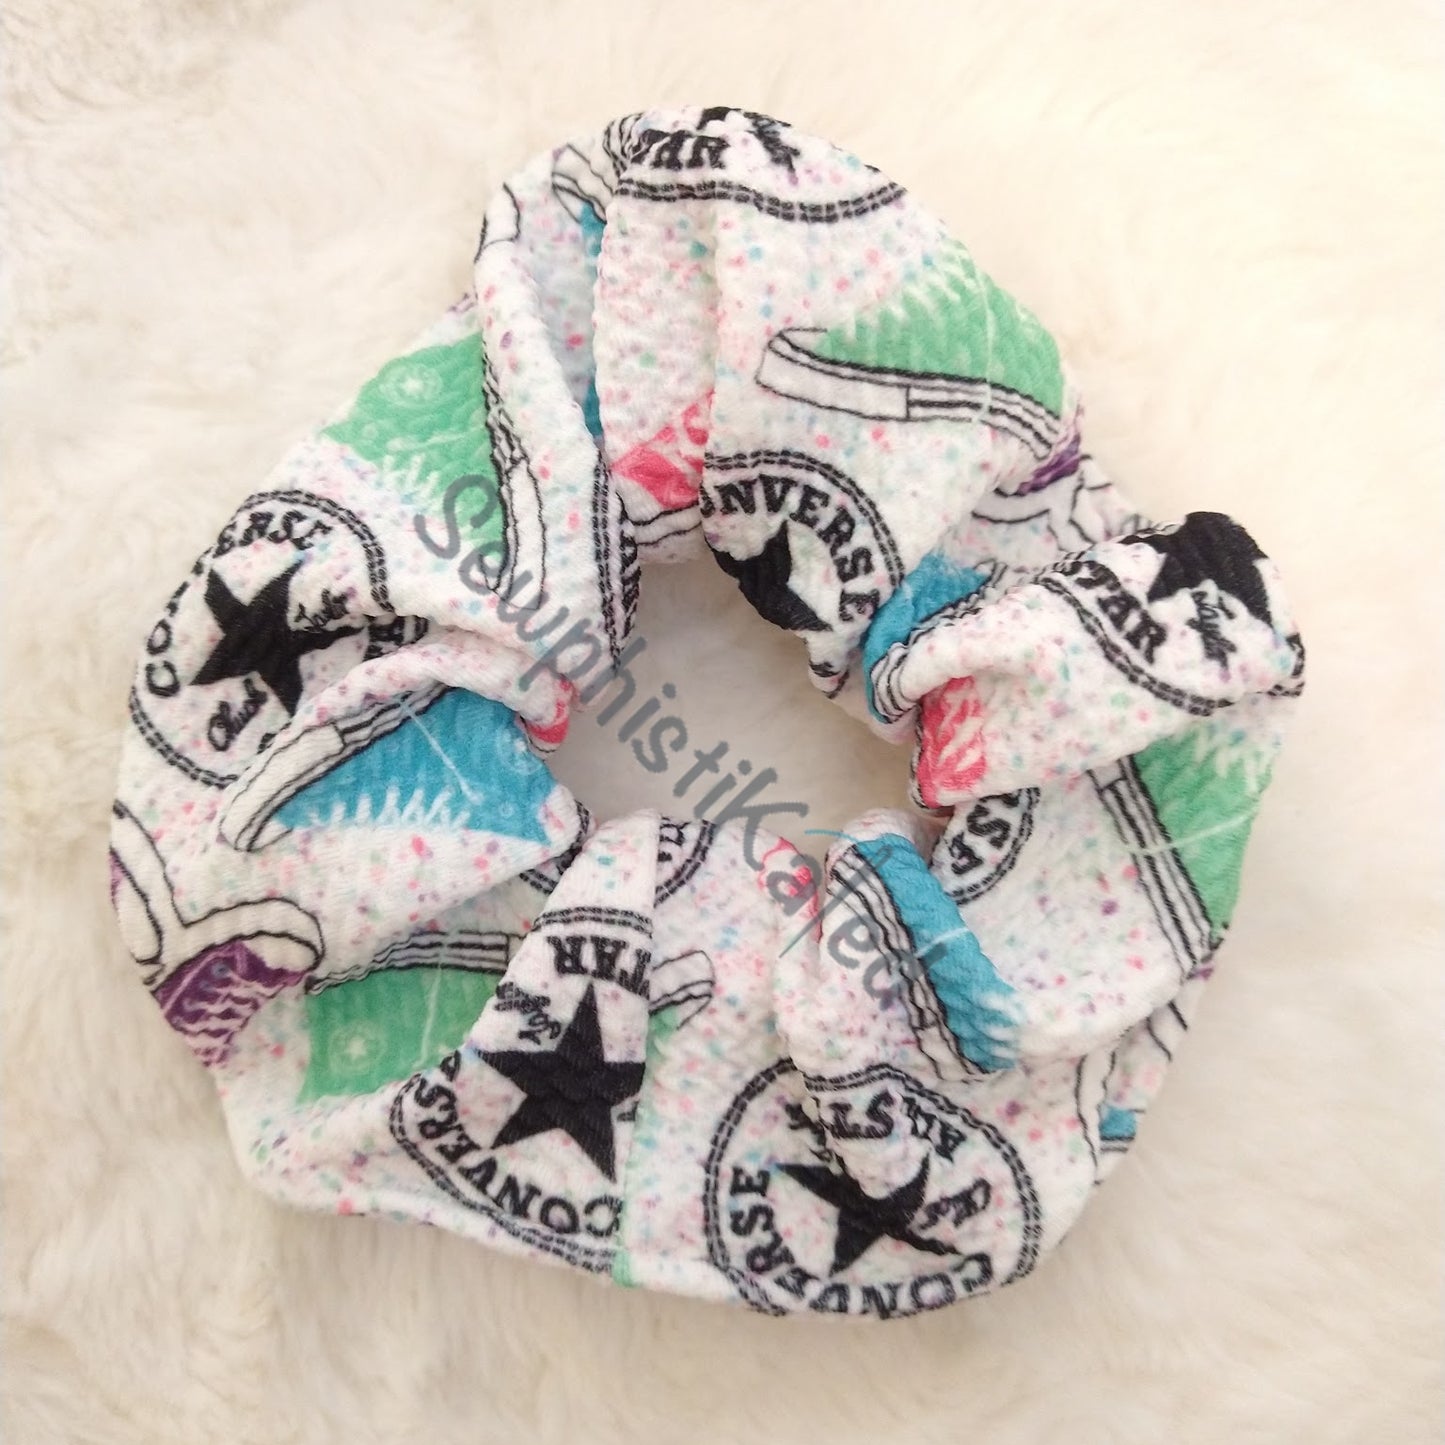 White All-Star Sneakers Headbands & Scrunchies